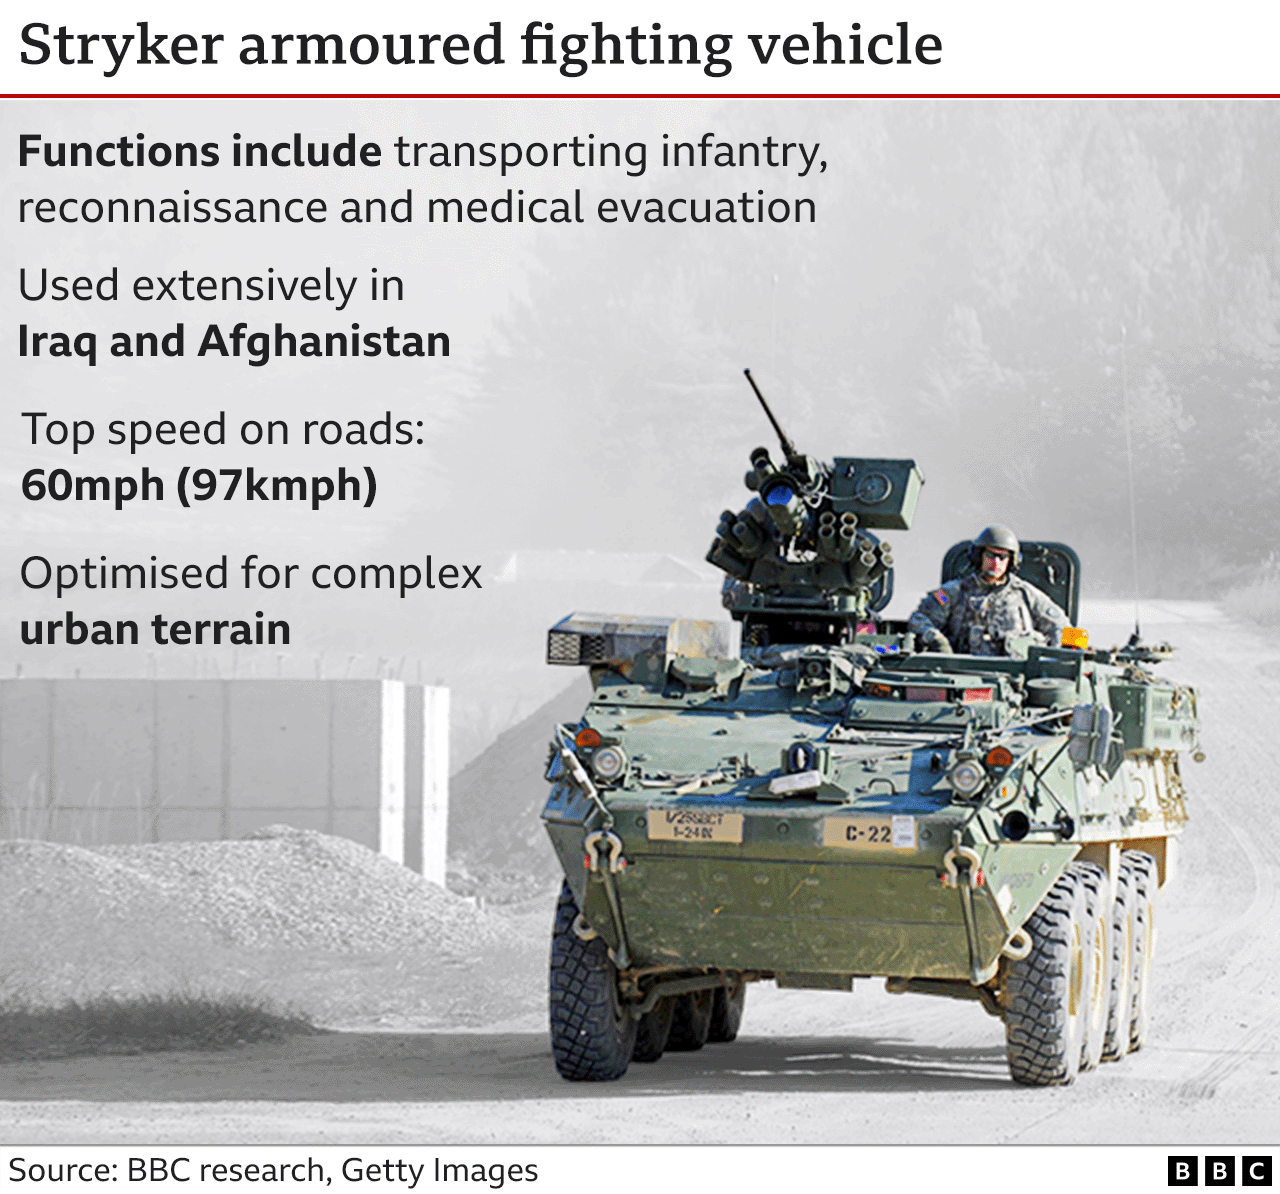 Graphic showing the characteristics of the Stryker armoured fighting vehicle. The Stryker is a fast armoured transport and reconnaissance vehicle, which has been optimised for complex urban terrain.